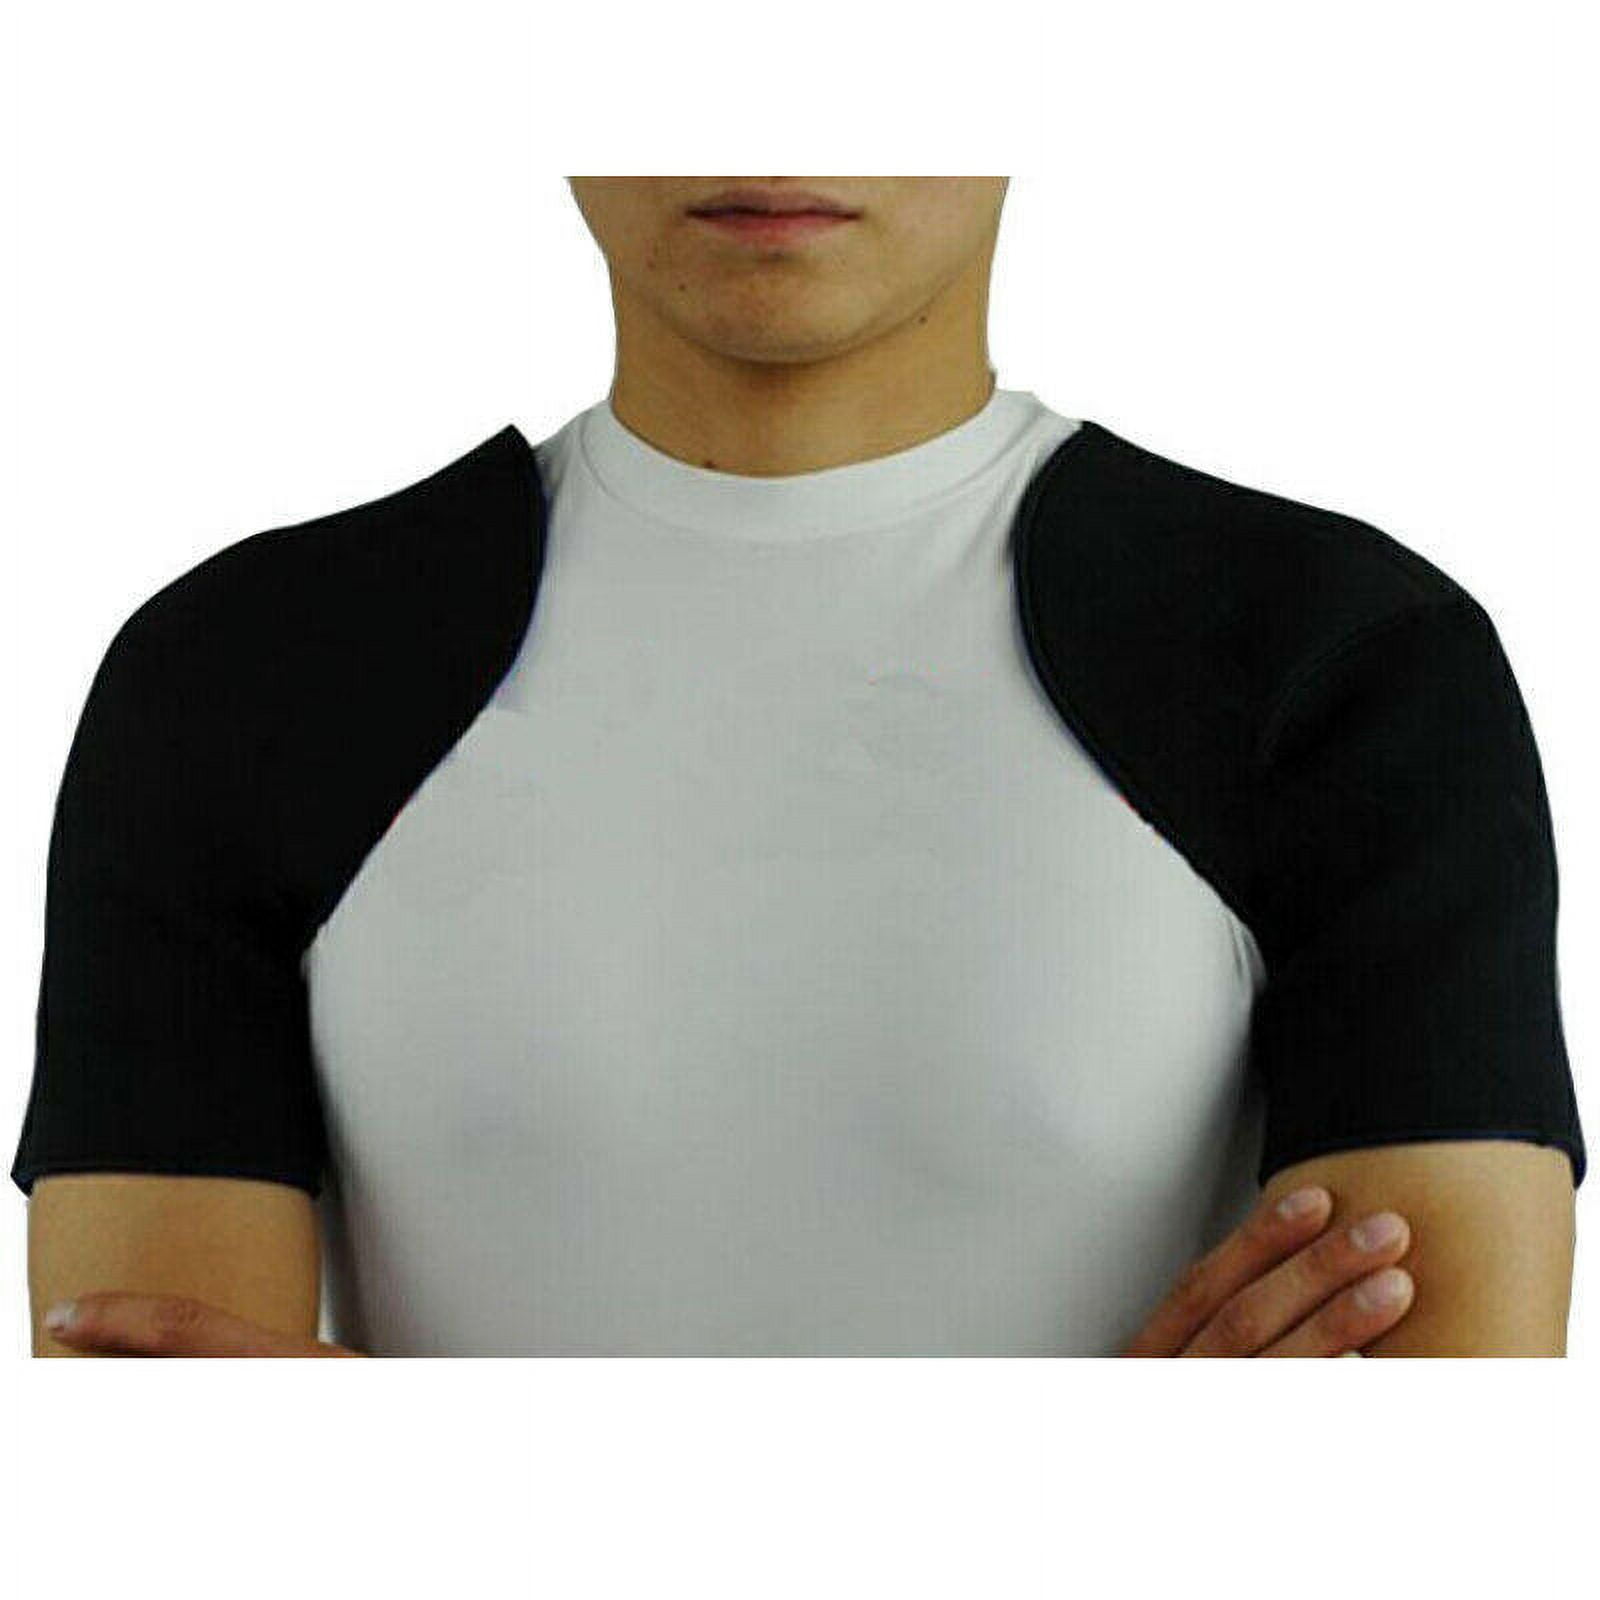 Double Shoulder Support Brace Strap, Sports Rotator Cuff Support